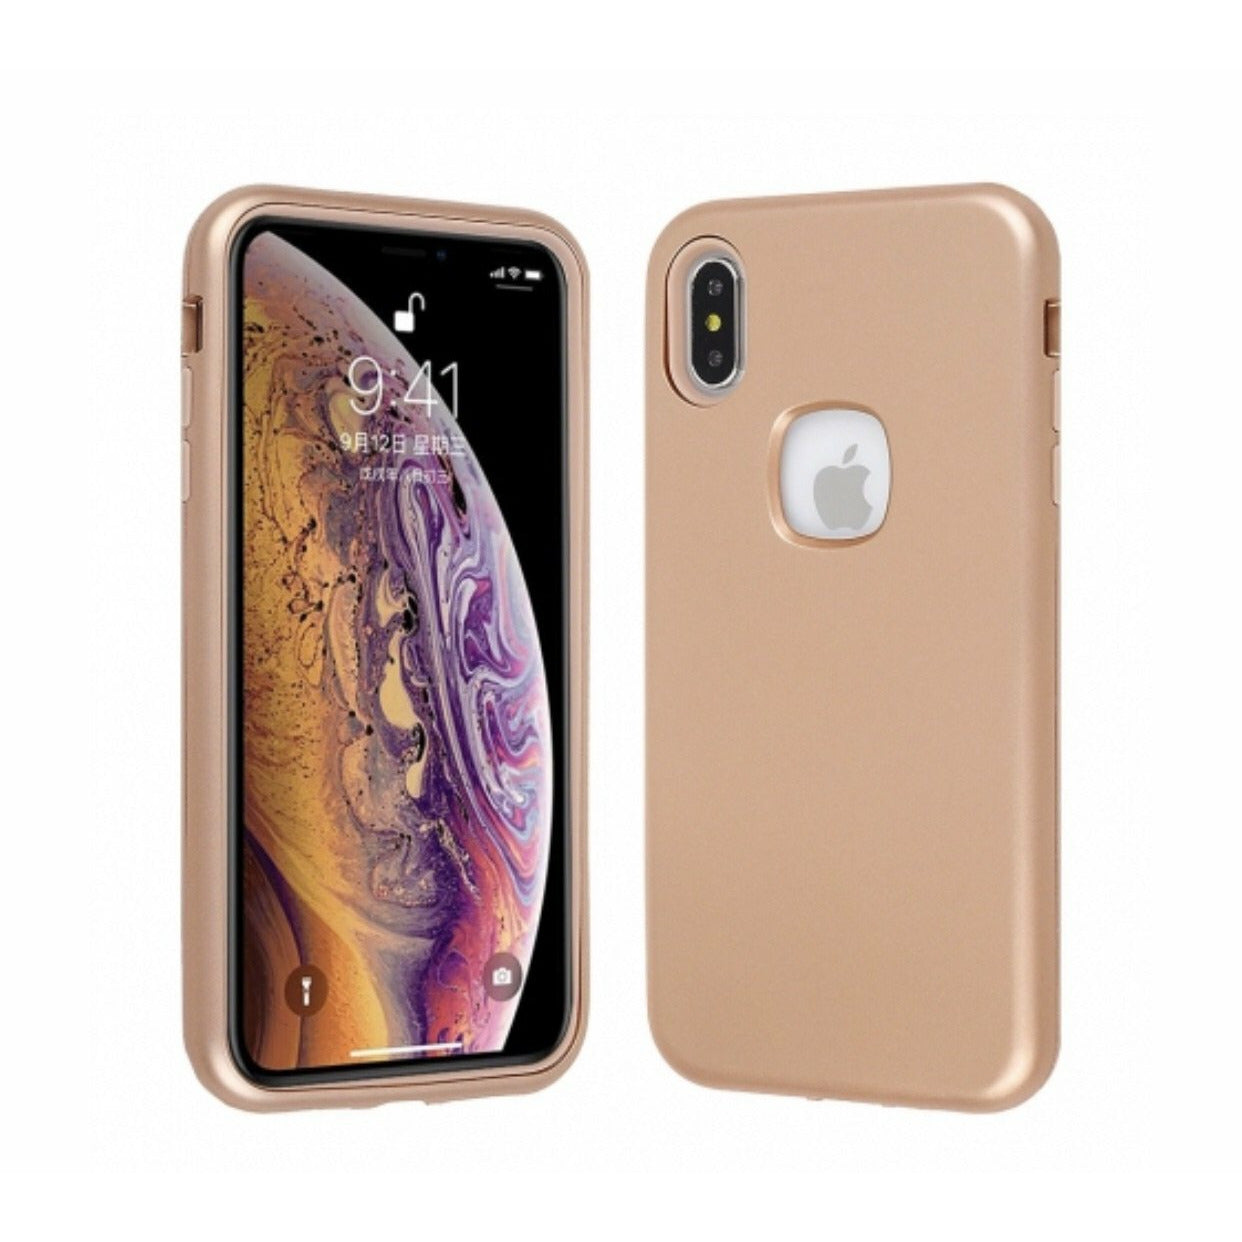 Apple iPhone Xs Max - Rose Gold Hard Plastic Cover with Rose Gold Soft Silicone Skin